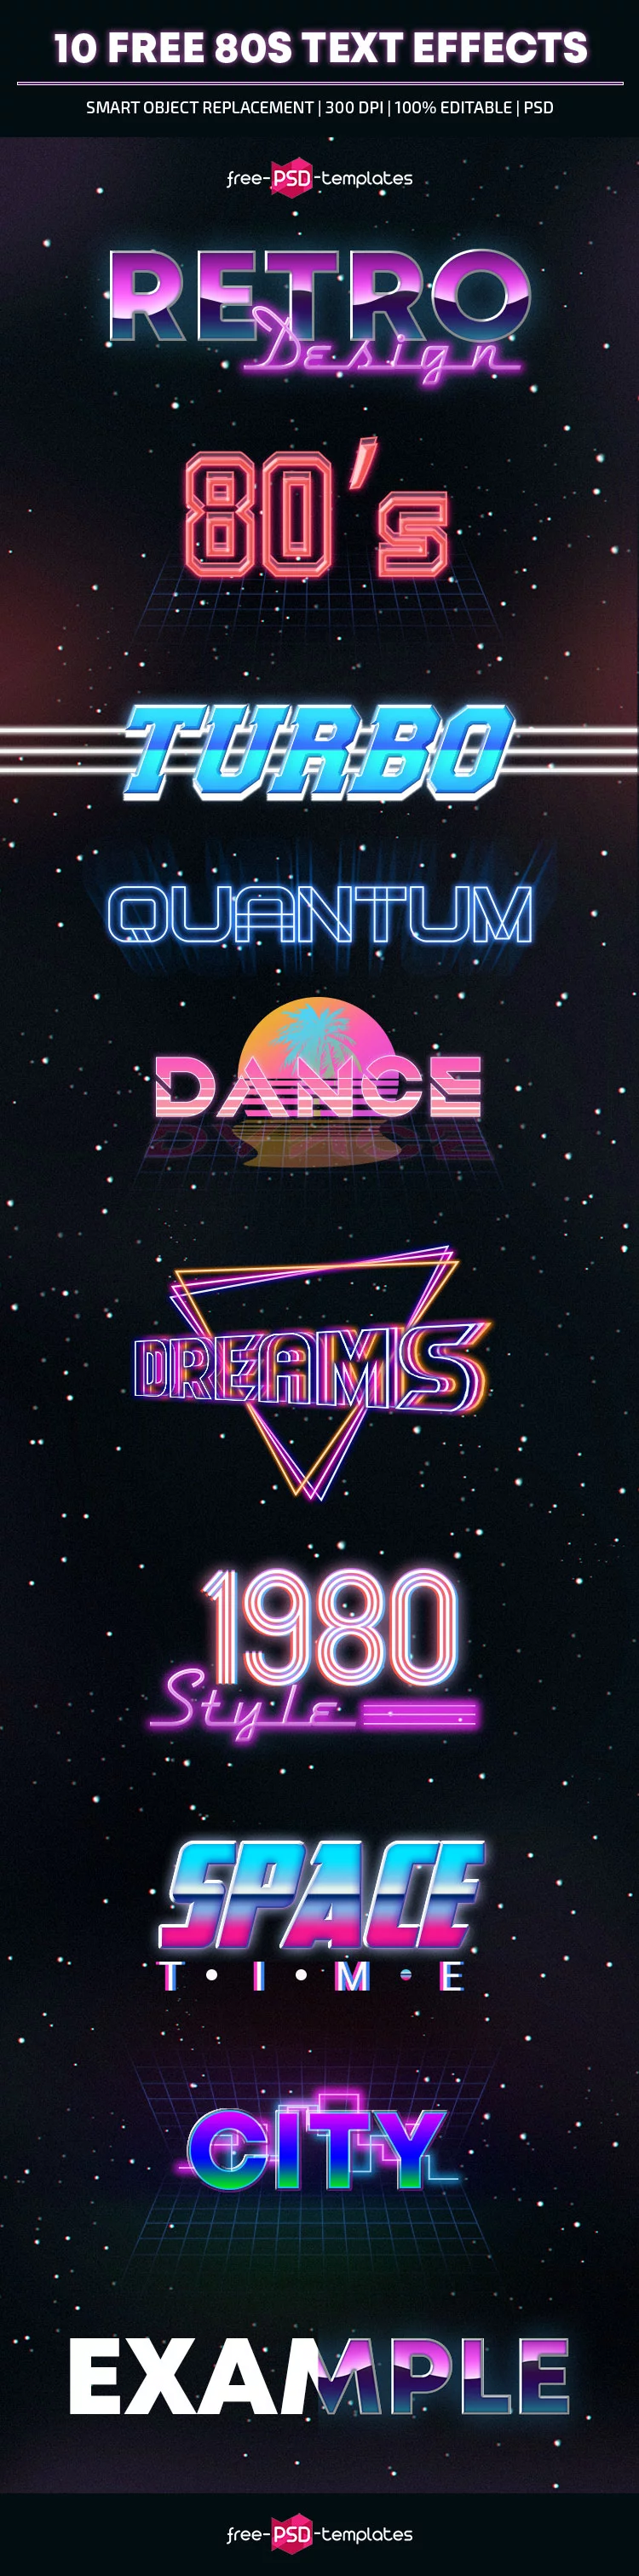 10 Free 80s Text Effects